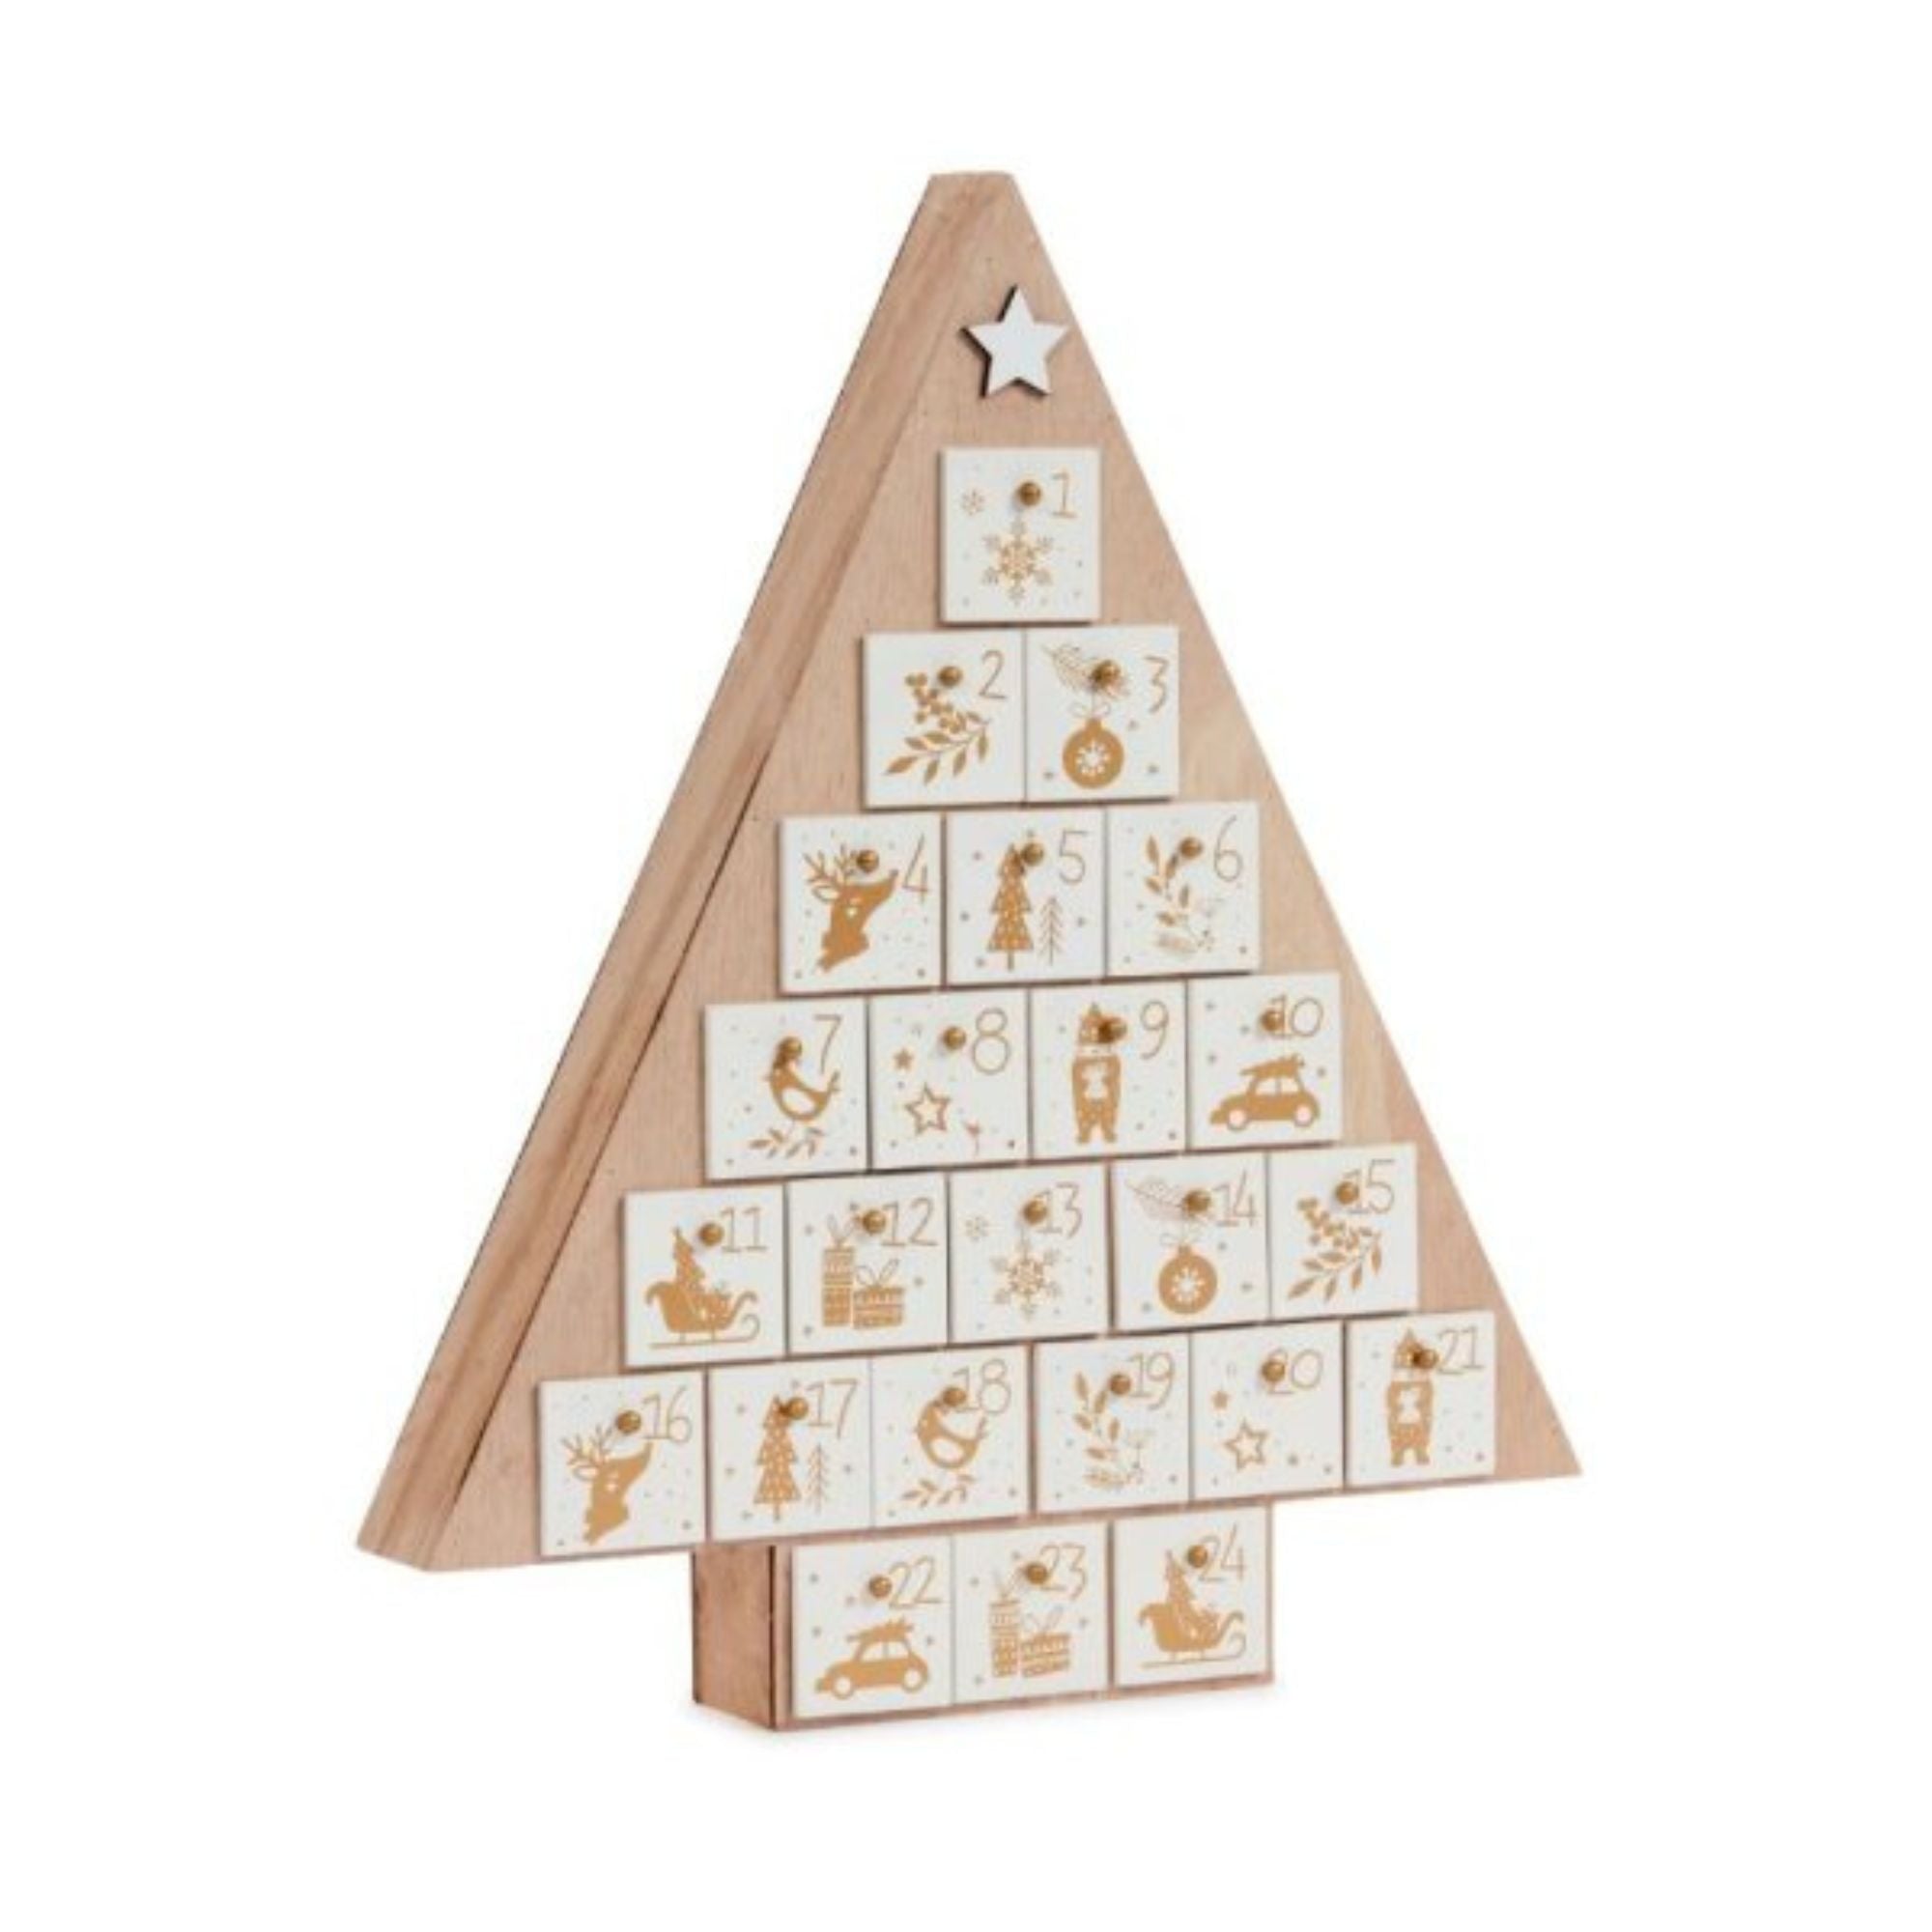 38cm Traditional Wooden Tree Advent Calendar Christmas Decoration with White Drawers